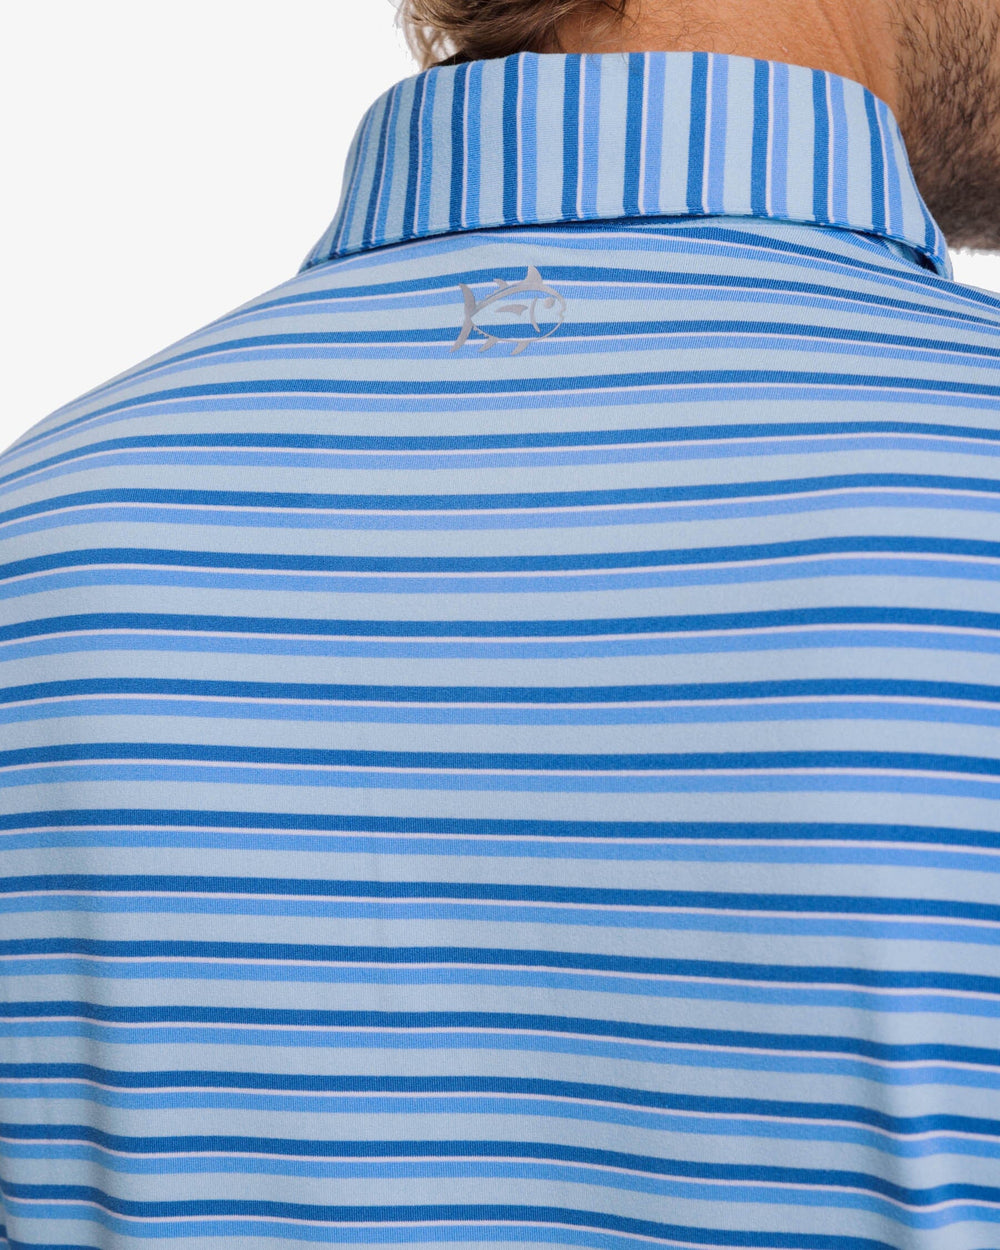 The detail view of the Southern Tide Ryder Heather Kendrick Performance Polo Shirt by Southern Tide - Heather Rain Water